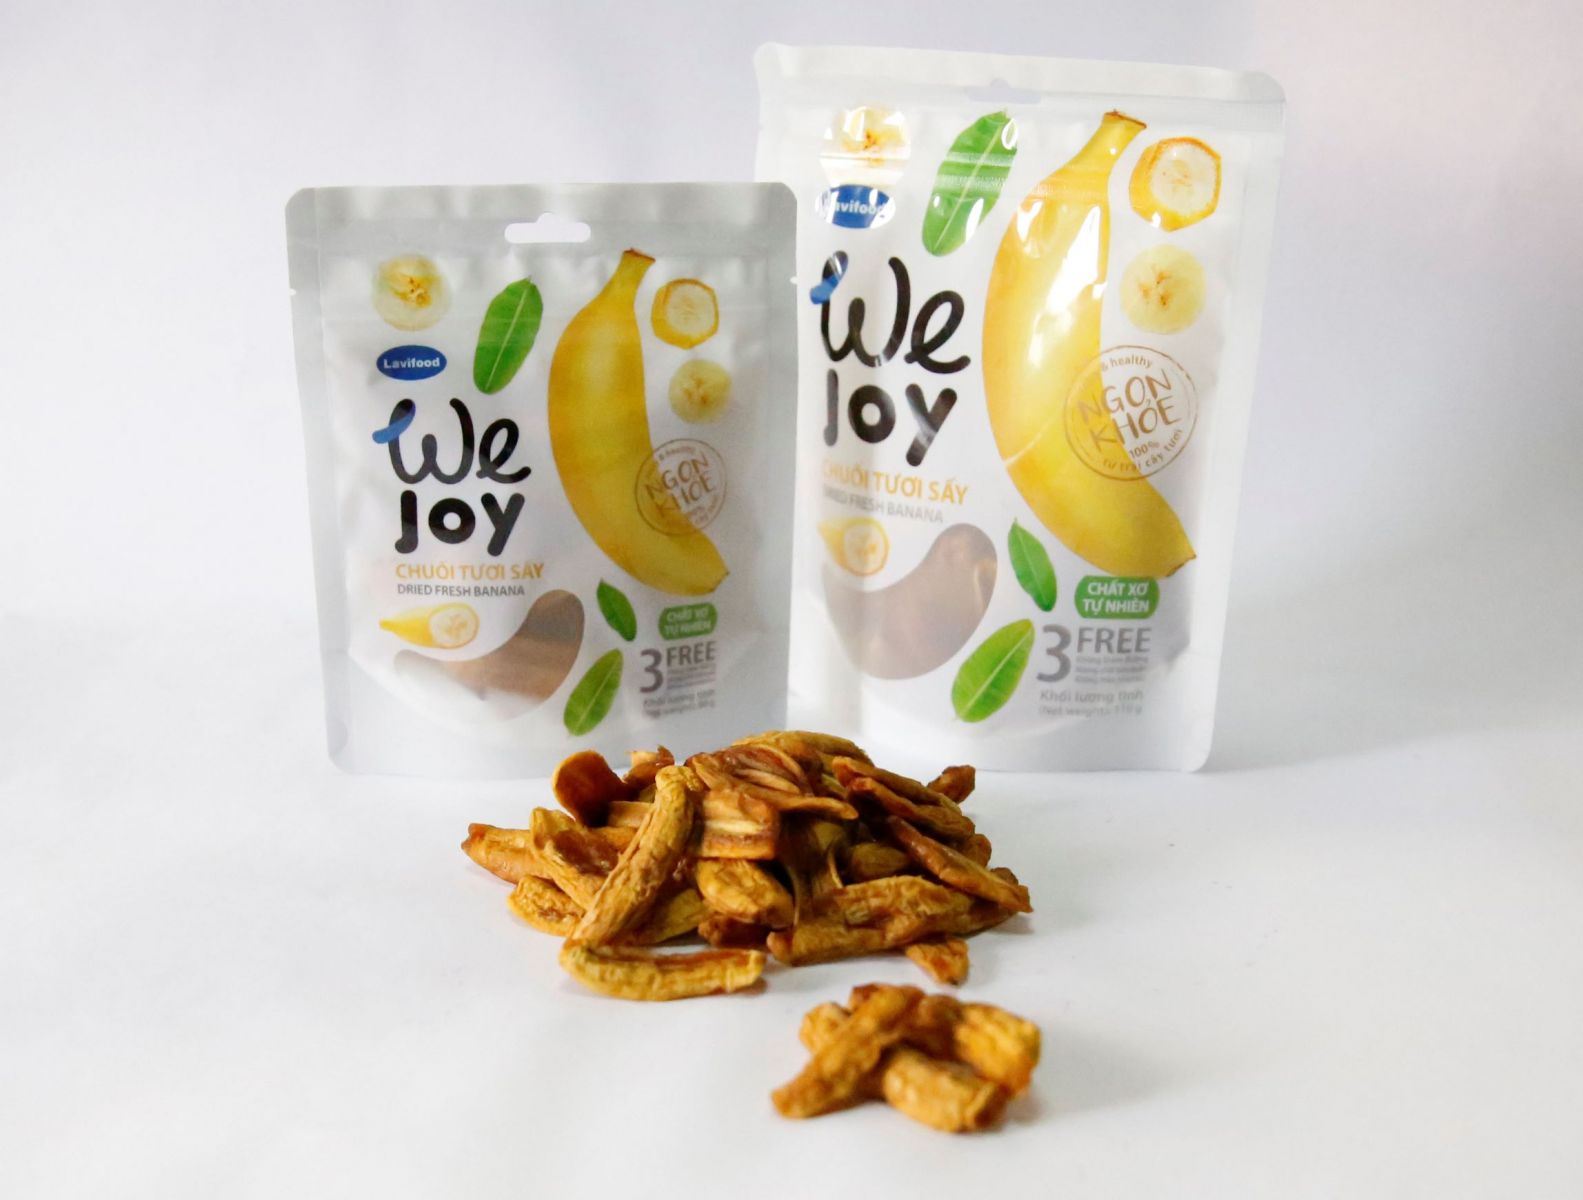 http://www.lavifood.com/en/products/dried-fruit-vegetables/we-joy-dried-banana